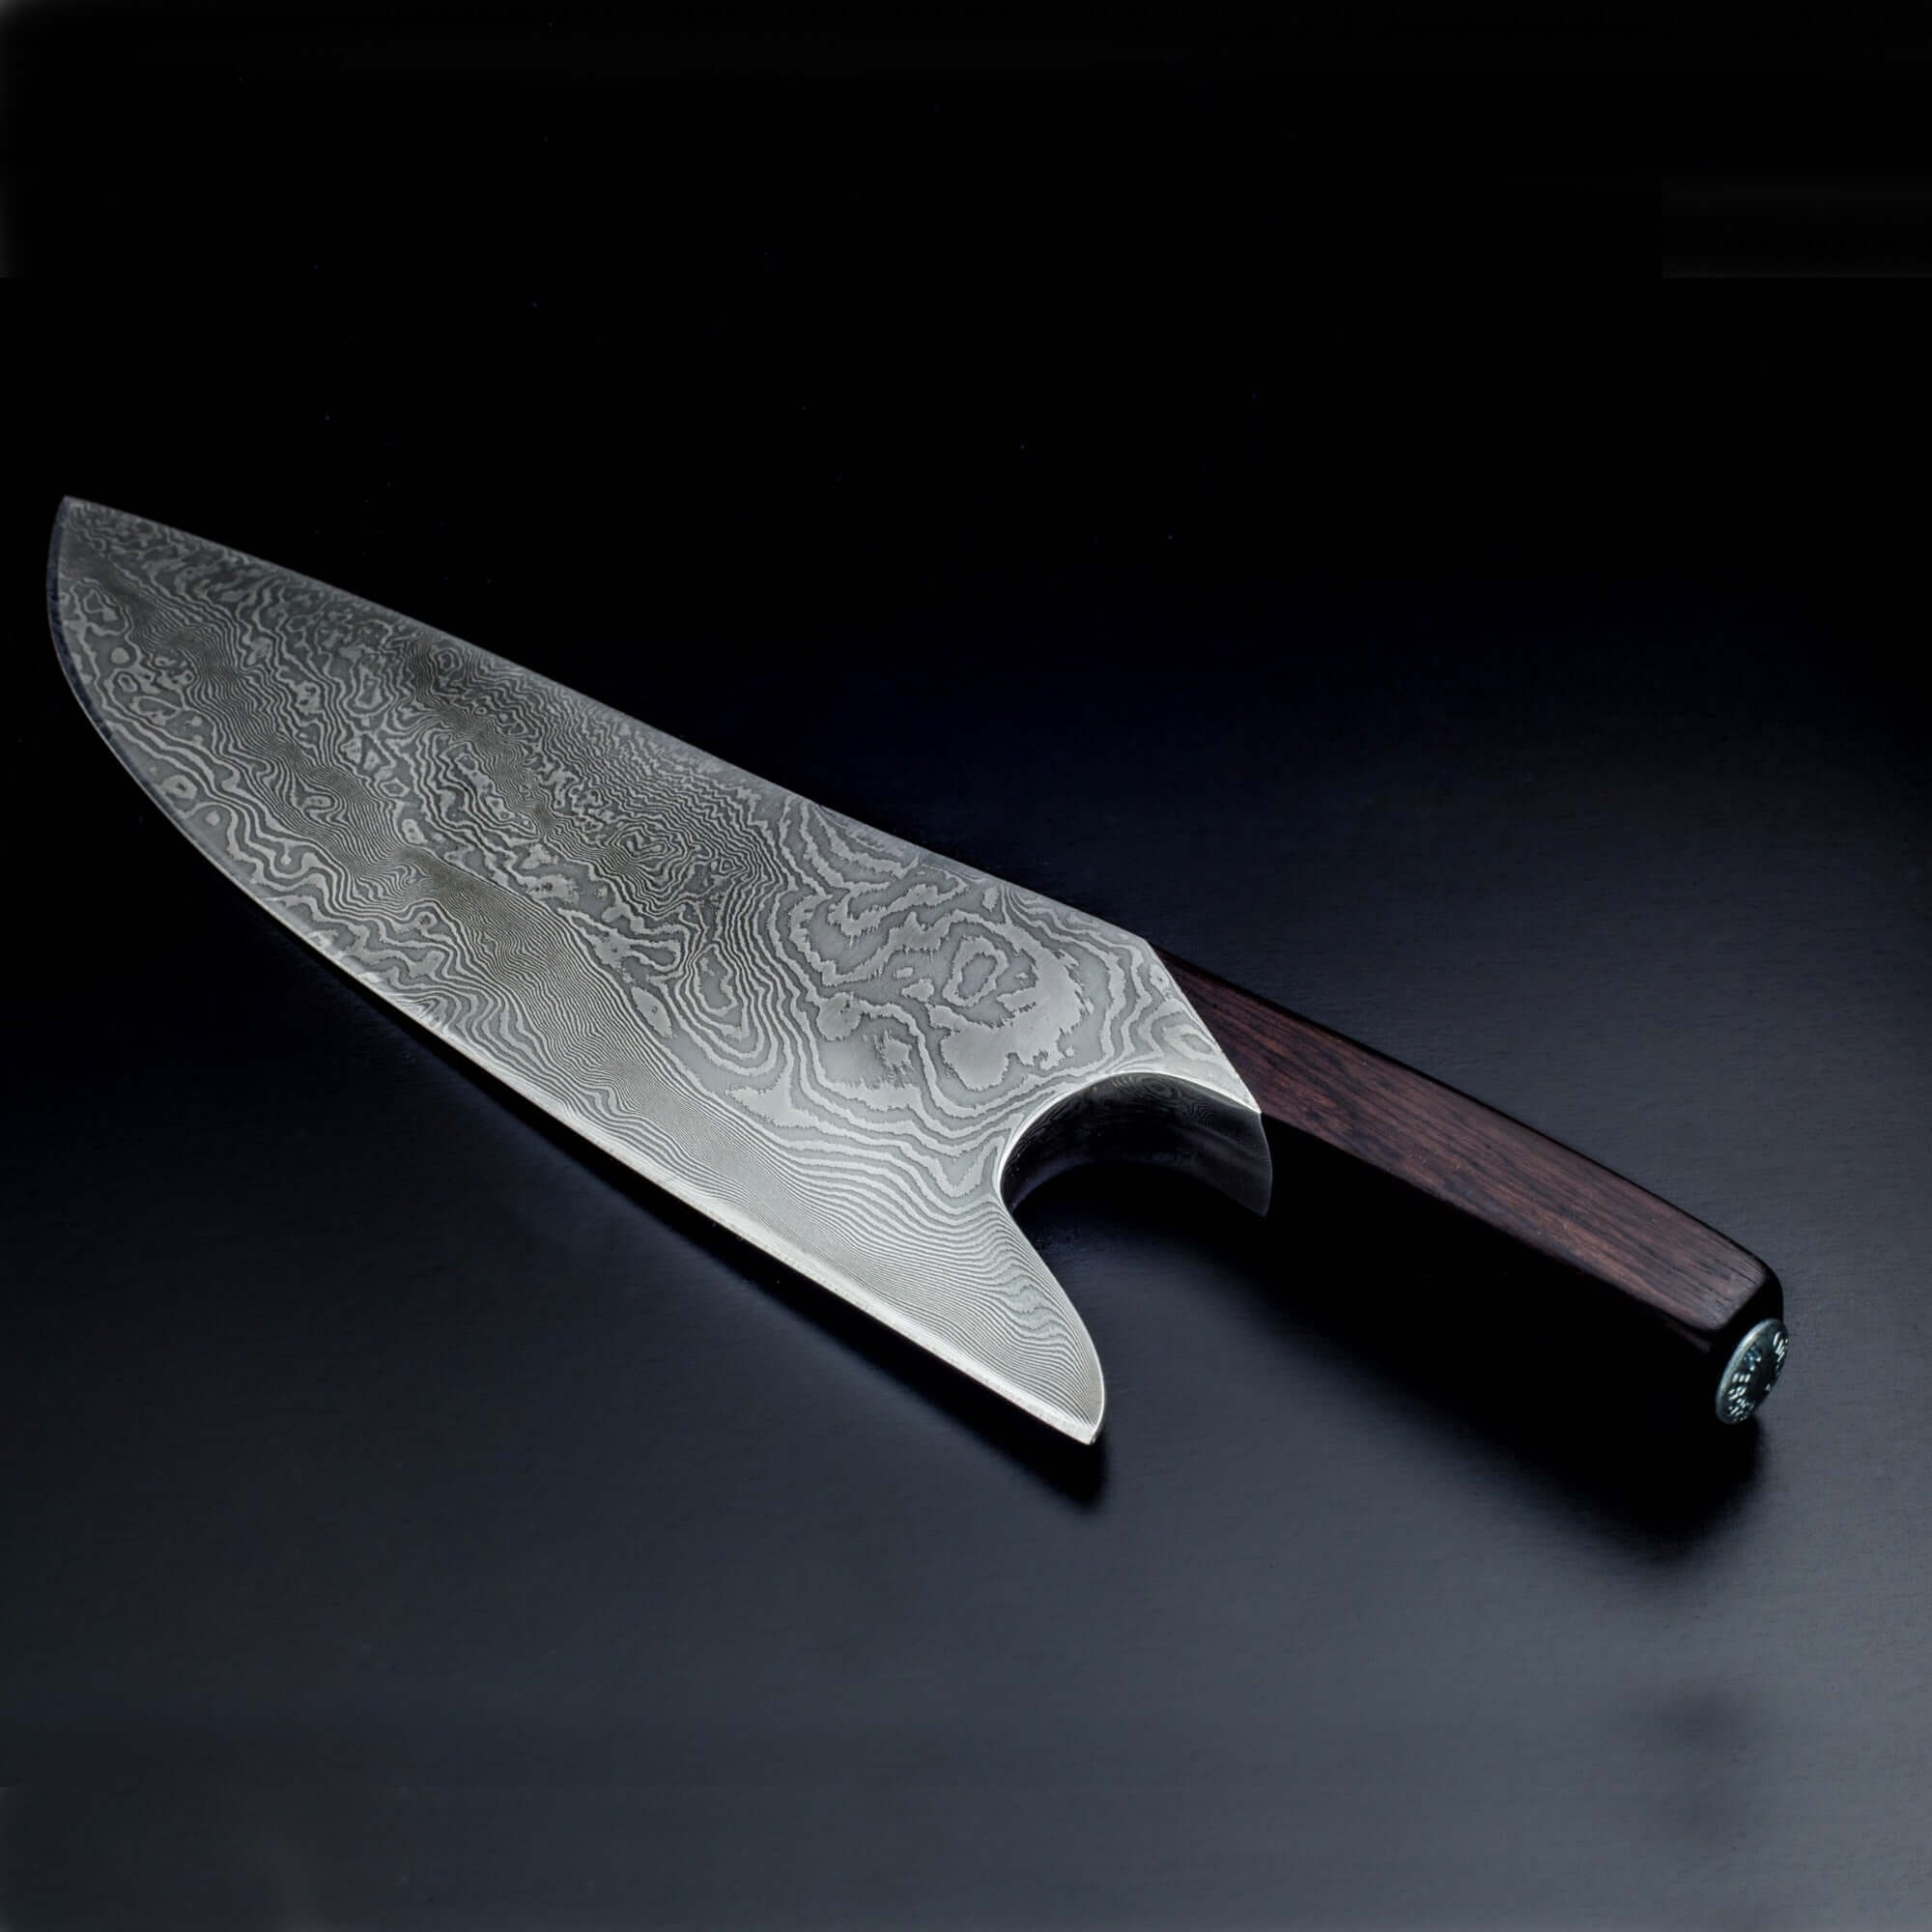 The Knife | Damascus Steel The Knife 26cm Blade